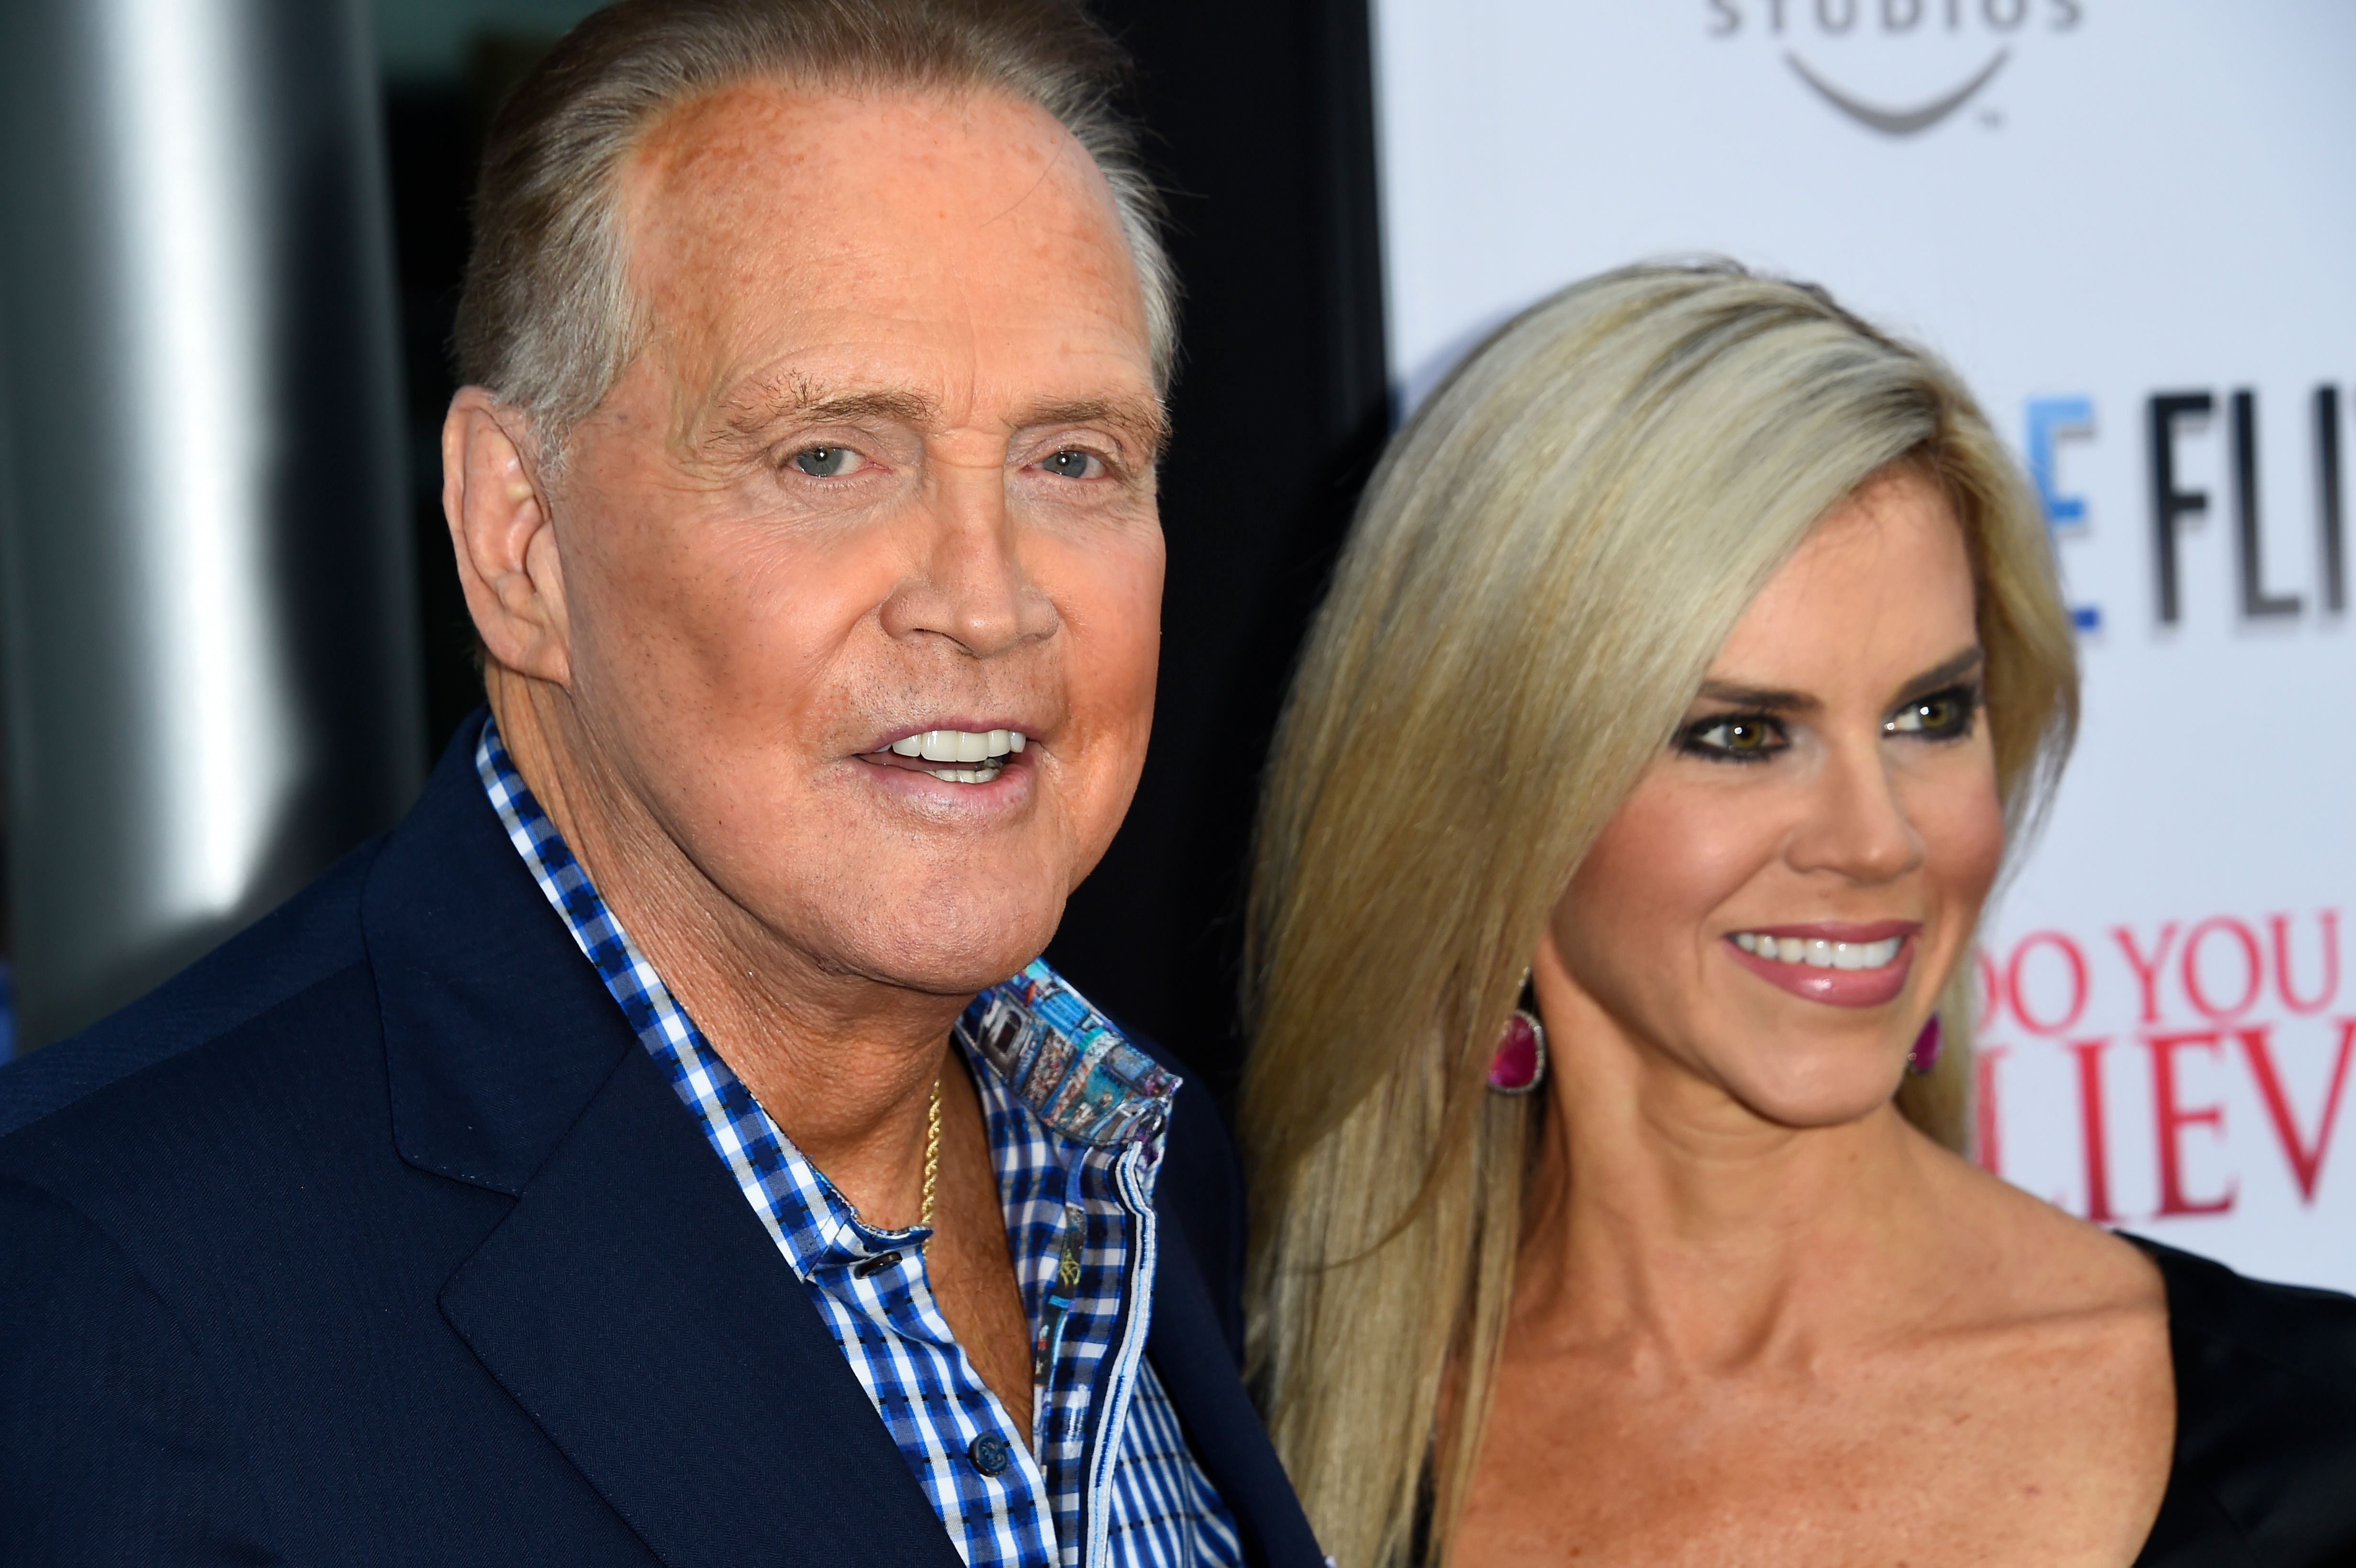 Lee Majors and his wife Faith Majors at the premiere of "Do You Believe?" on March 16, 2015, in California. | Source: Getty Images